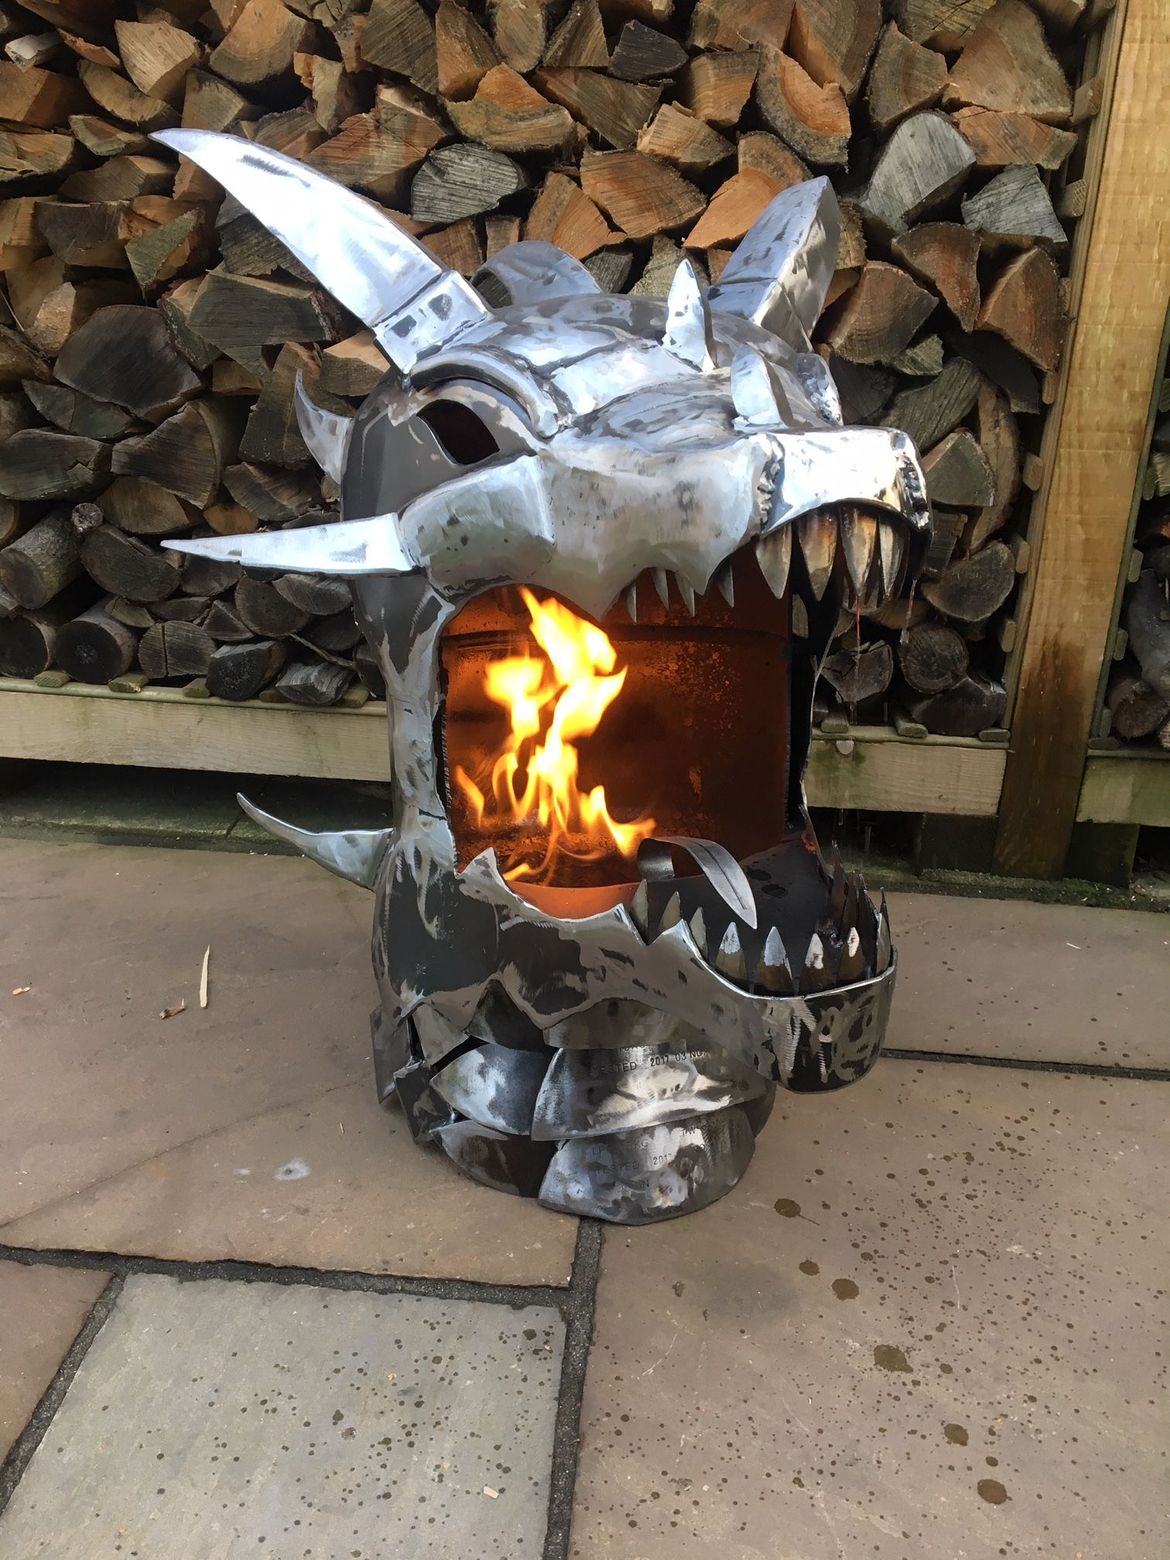 A steel sculpture of a dragon's head turned with flames in its mouth